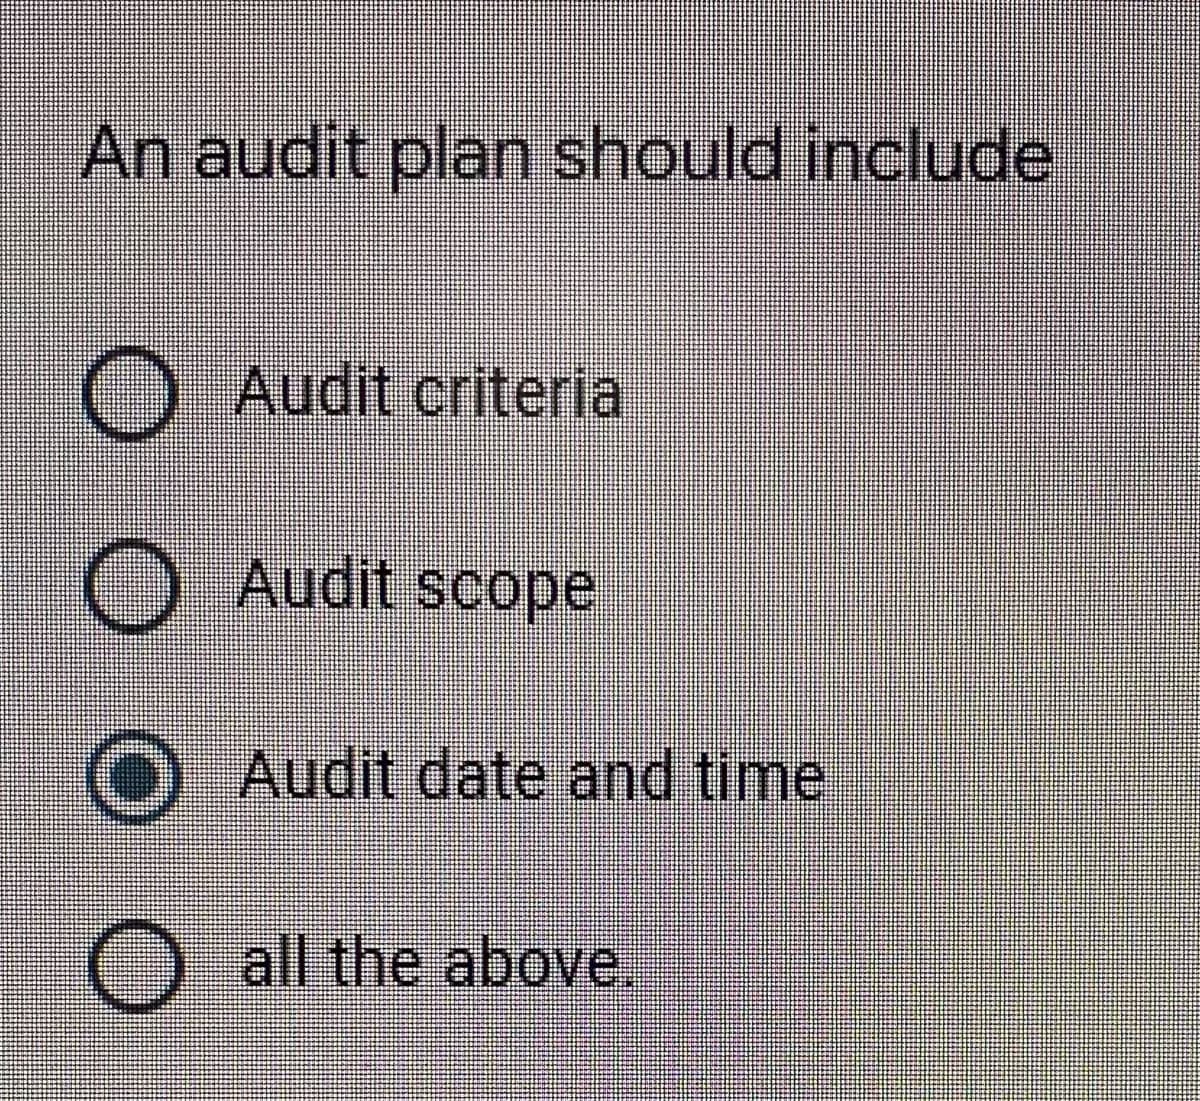 An audit plan should include
O Audit criteria
Audit scope
O Audit date and time
O all the above.